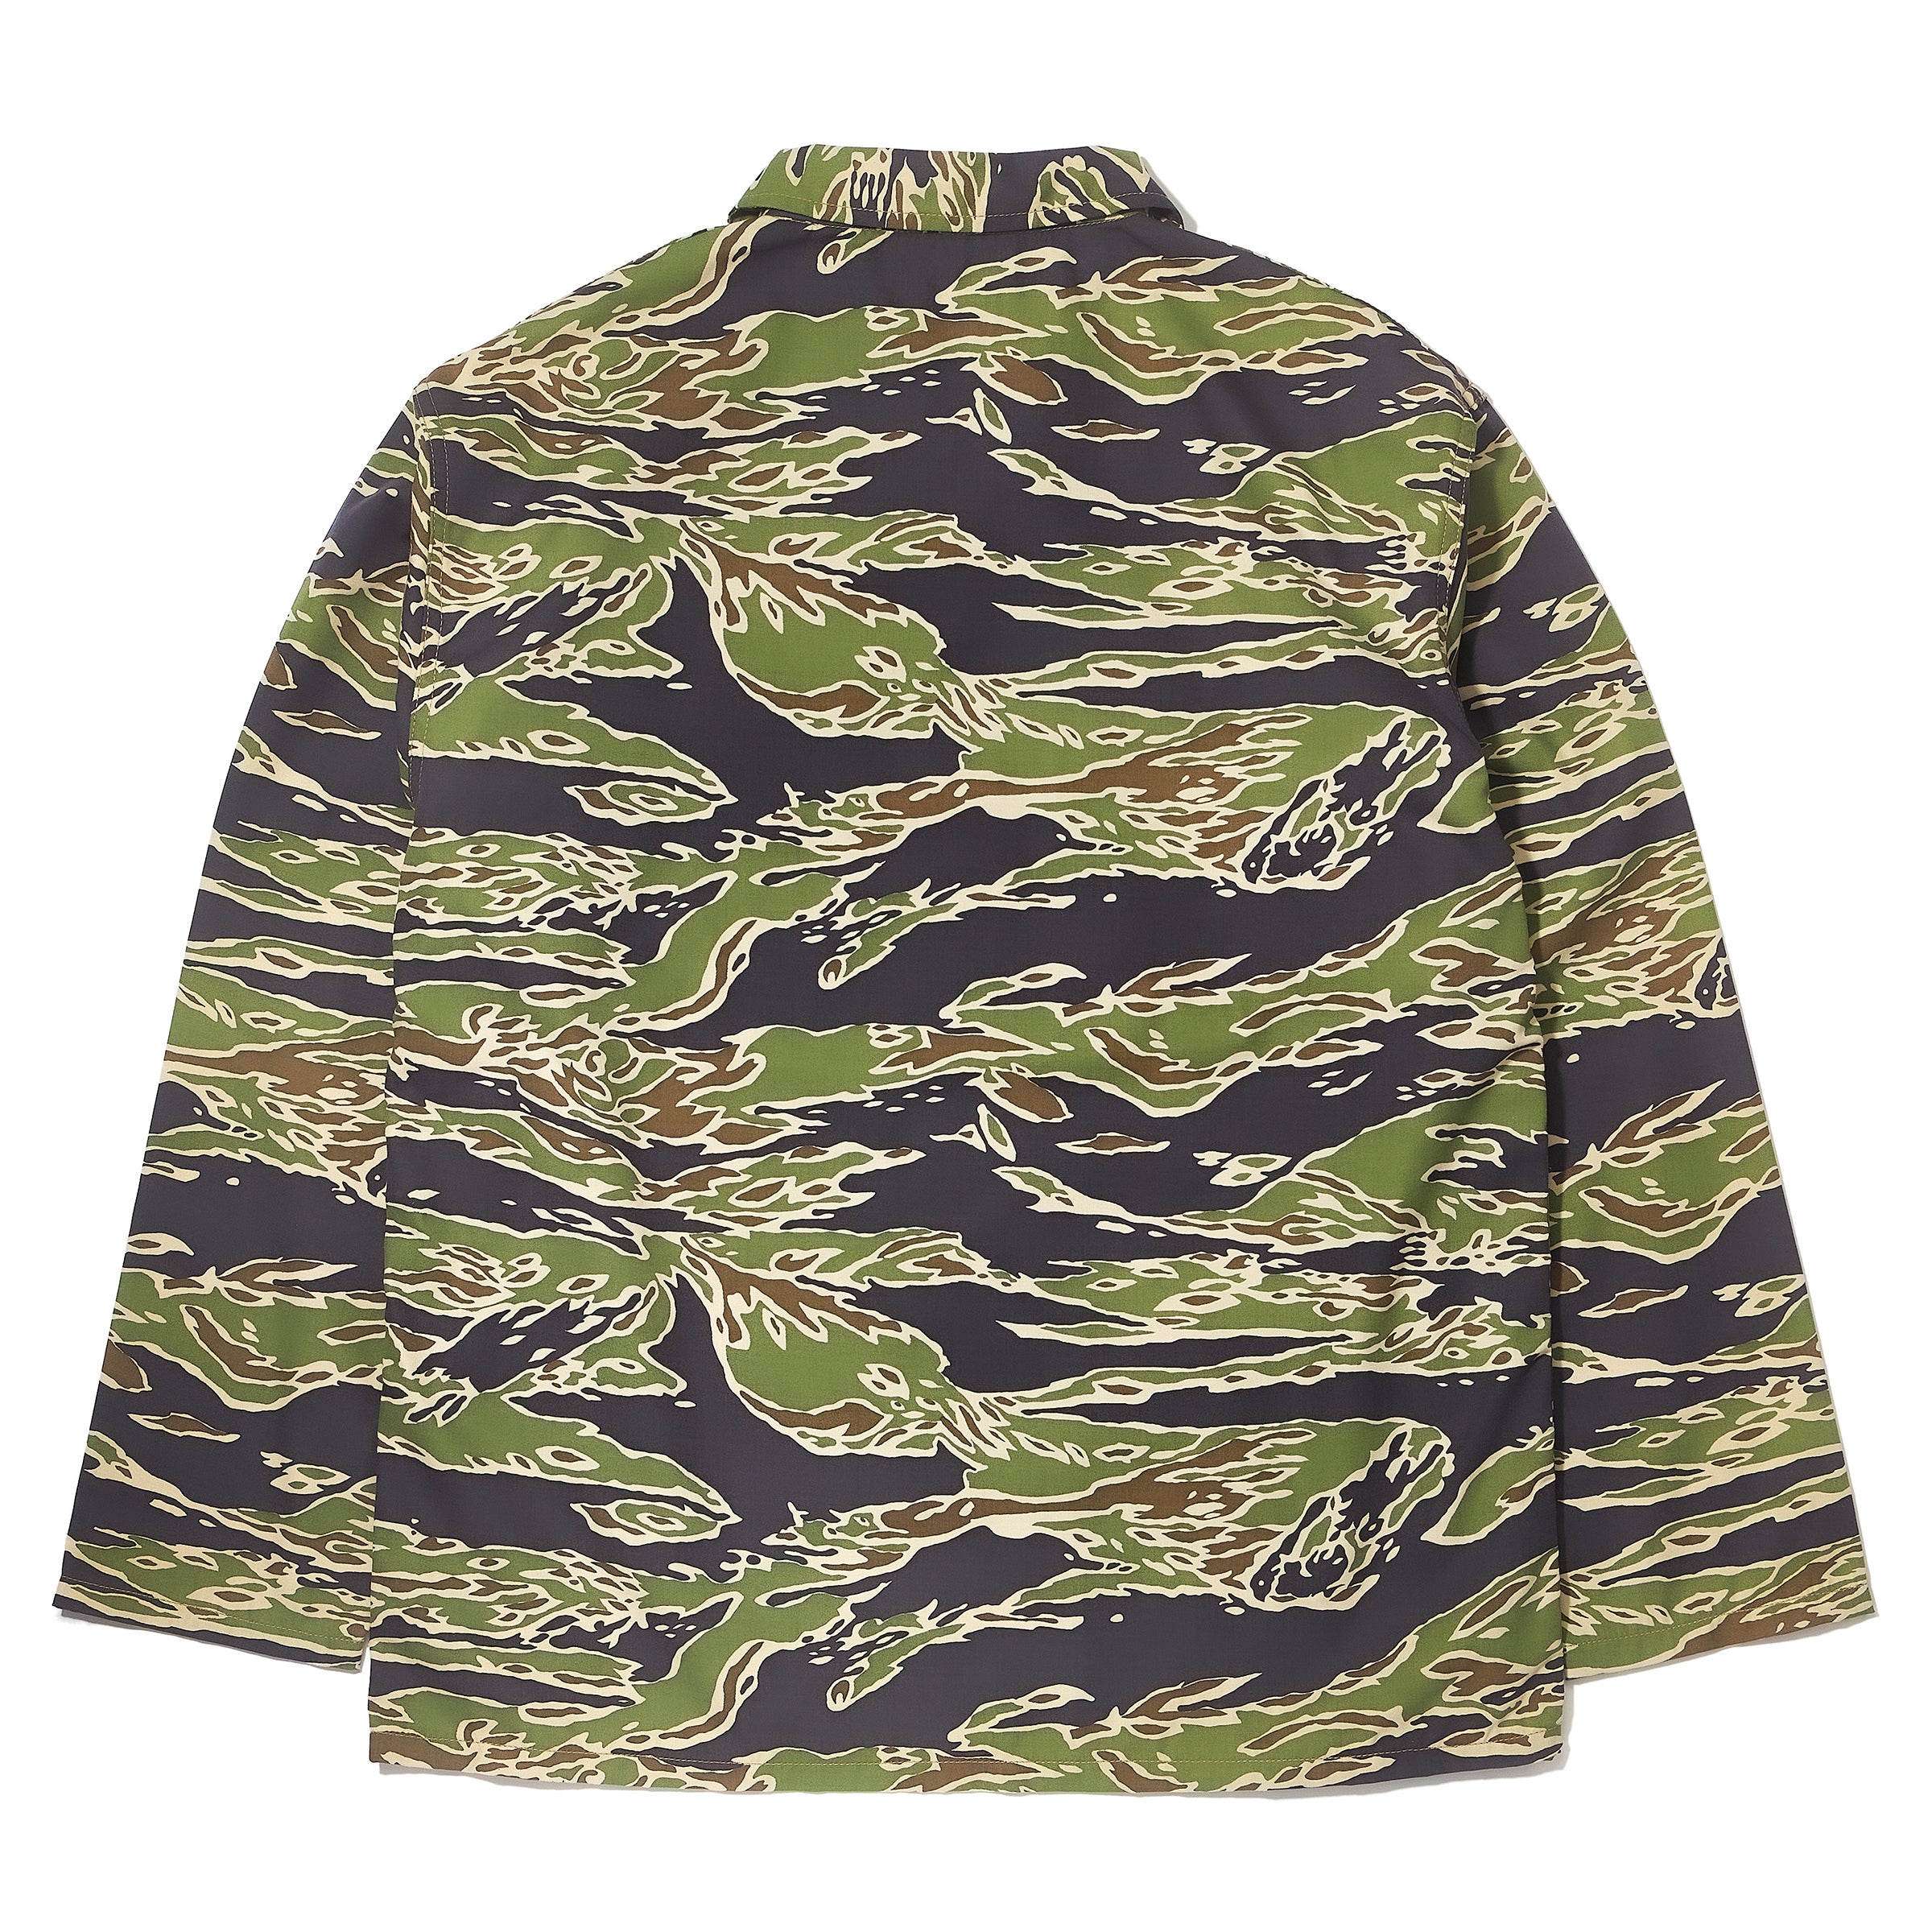 Shop Camo Thermal Shirts - Fatigues Army Navy Gear